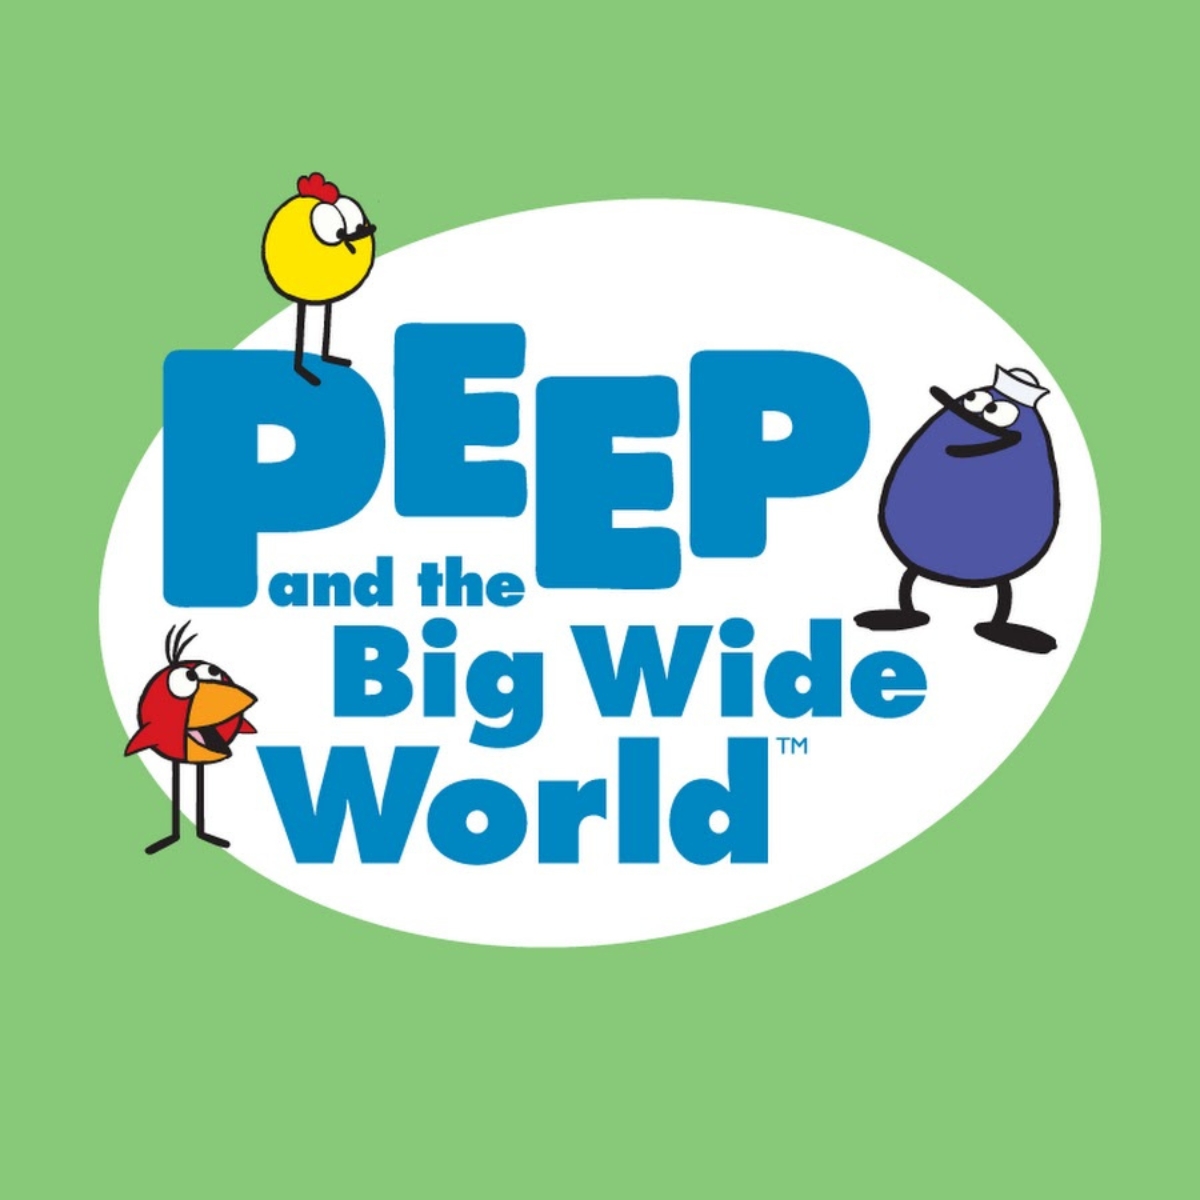 20-facts-about-peep-peep-and-the-big-wide-world